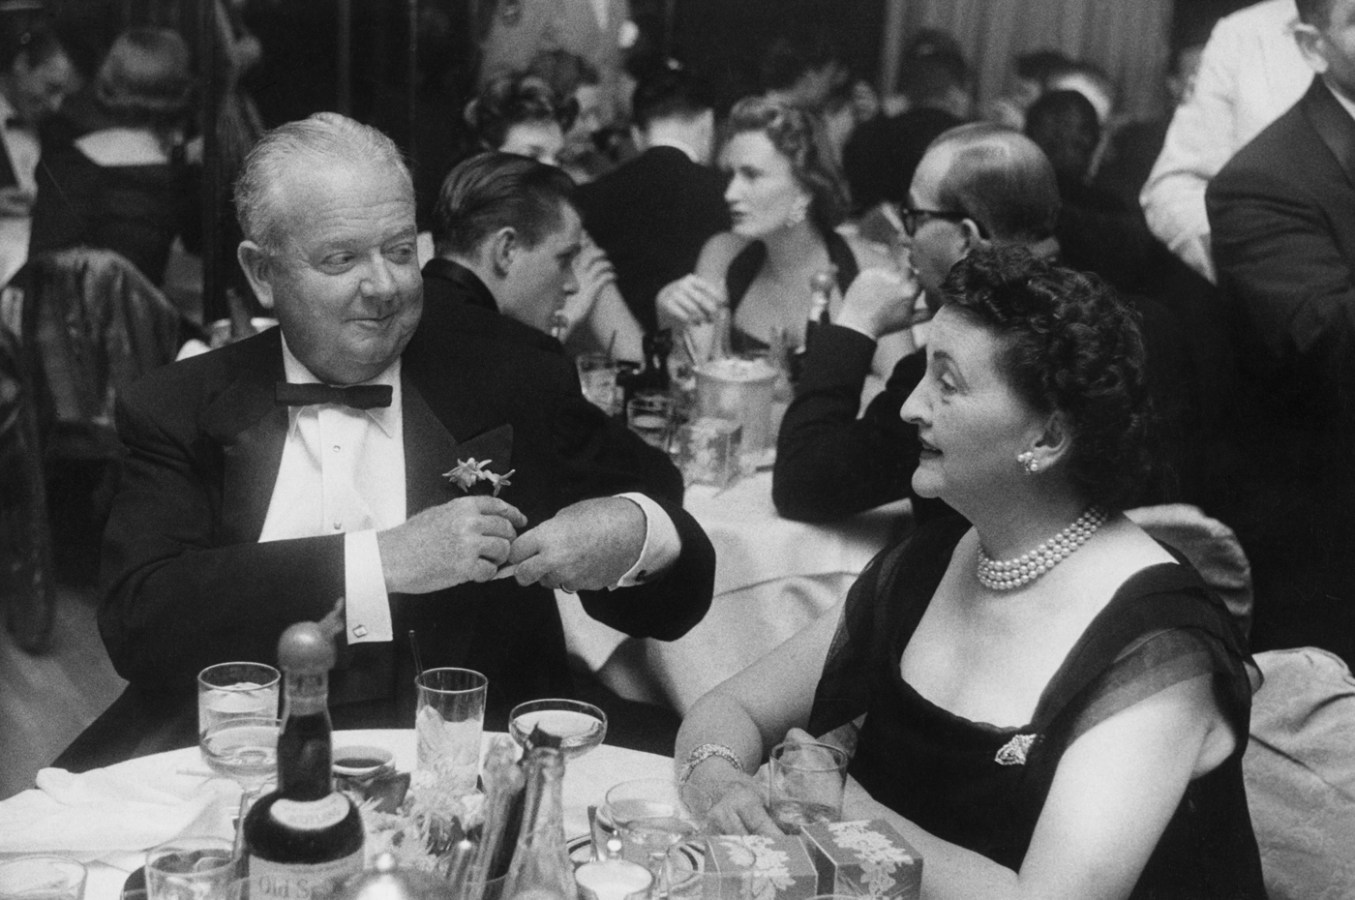 Black-and-white photograph of an older man and woman in formal dress conversing at a round table